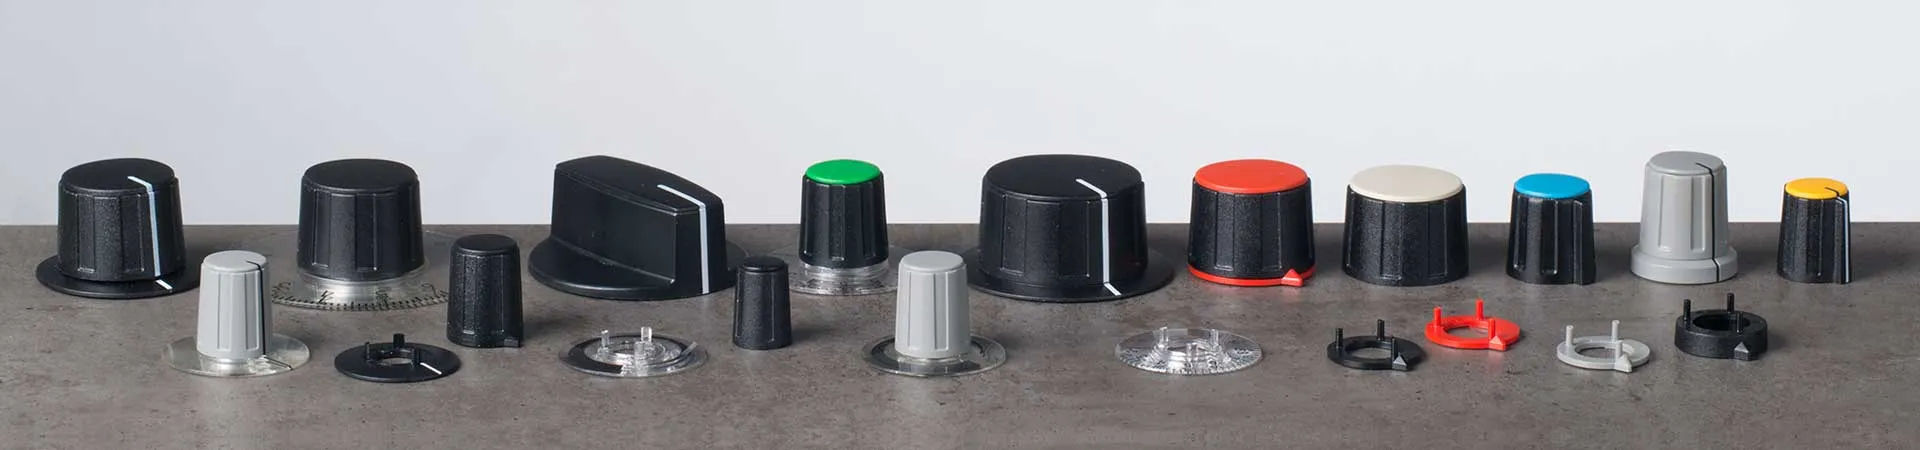 Tuning knobs with collet fixture Accessories combination knobs